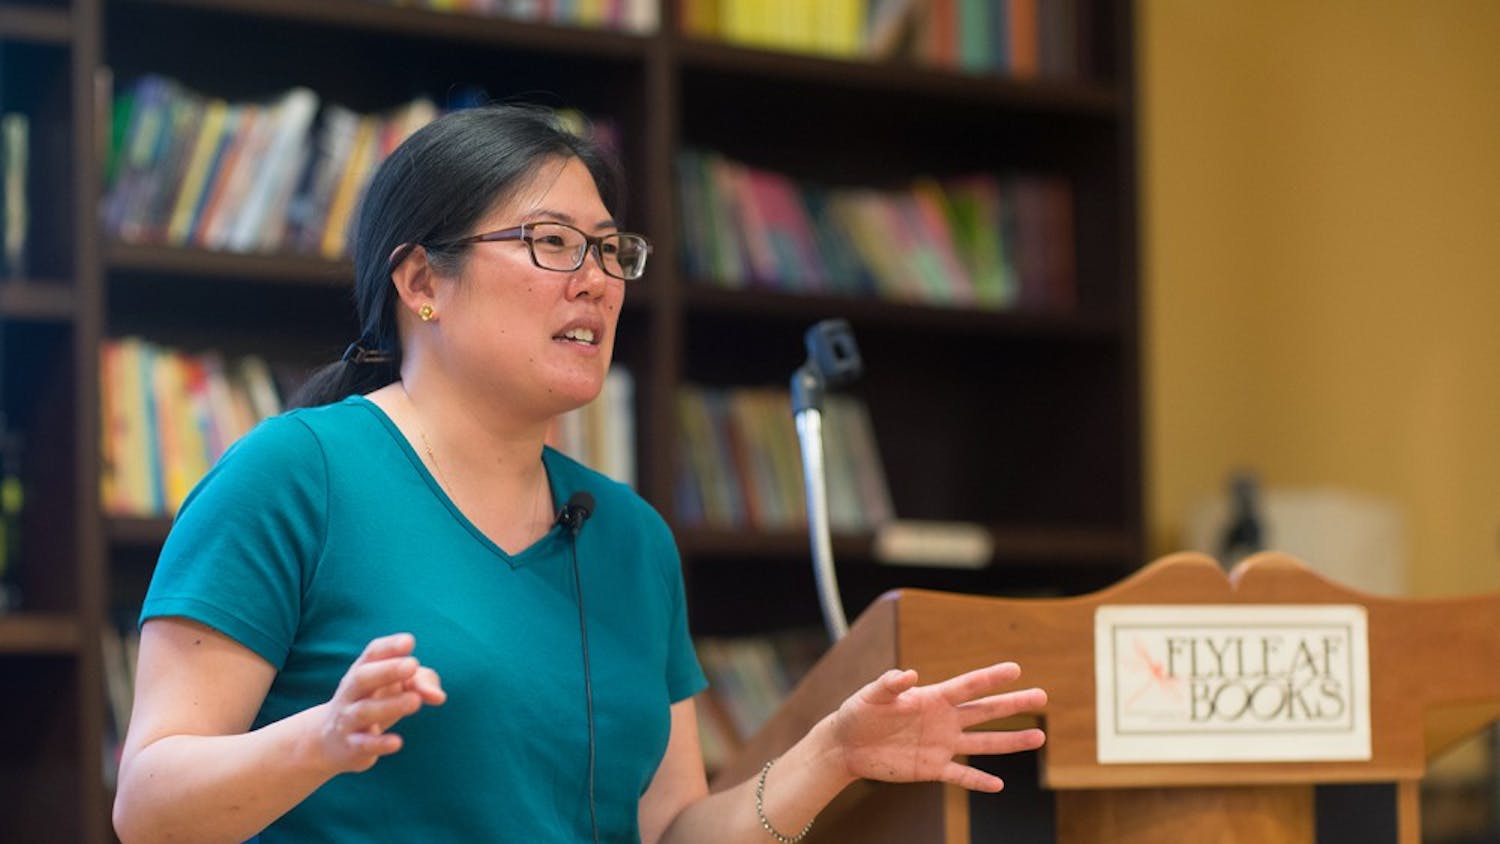 UNC assistant professor Heidi Kim shares her research on literature during the Cold War at Flyleaf Books on Tuesday, June 7th.